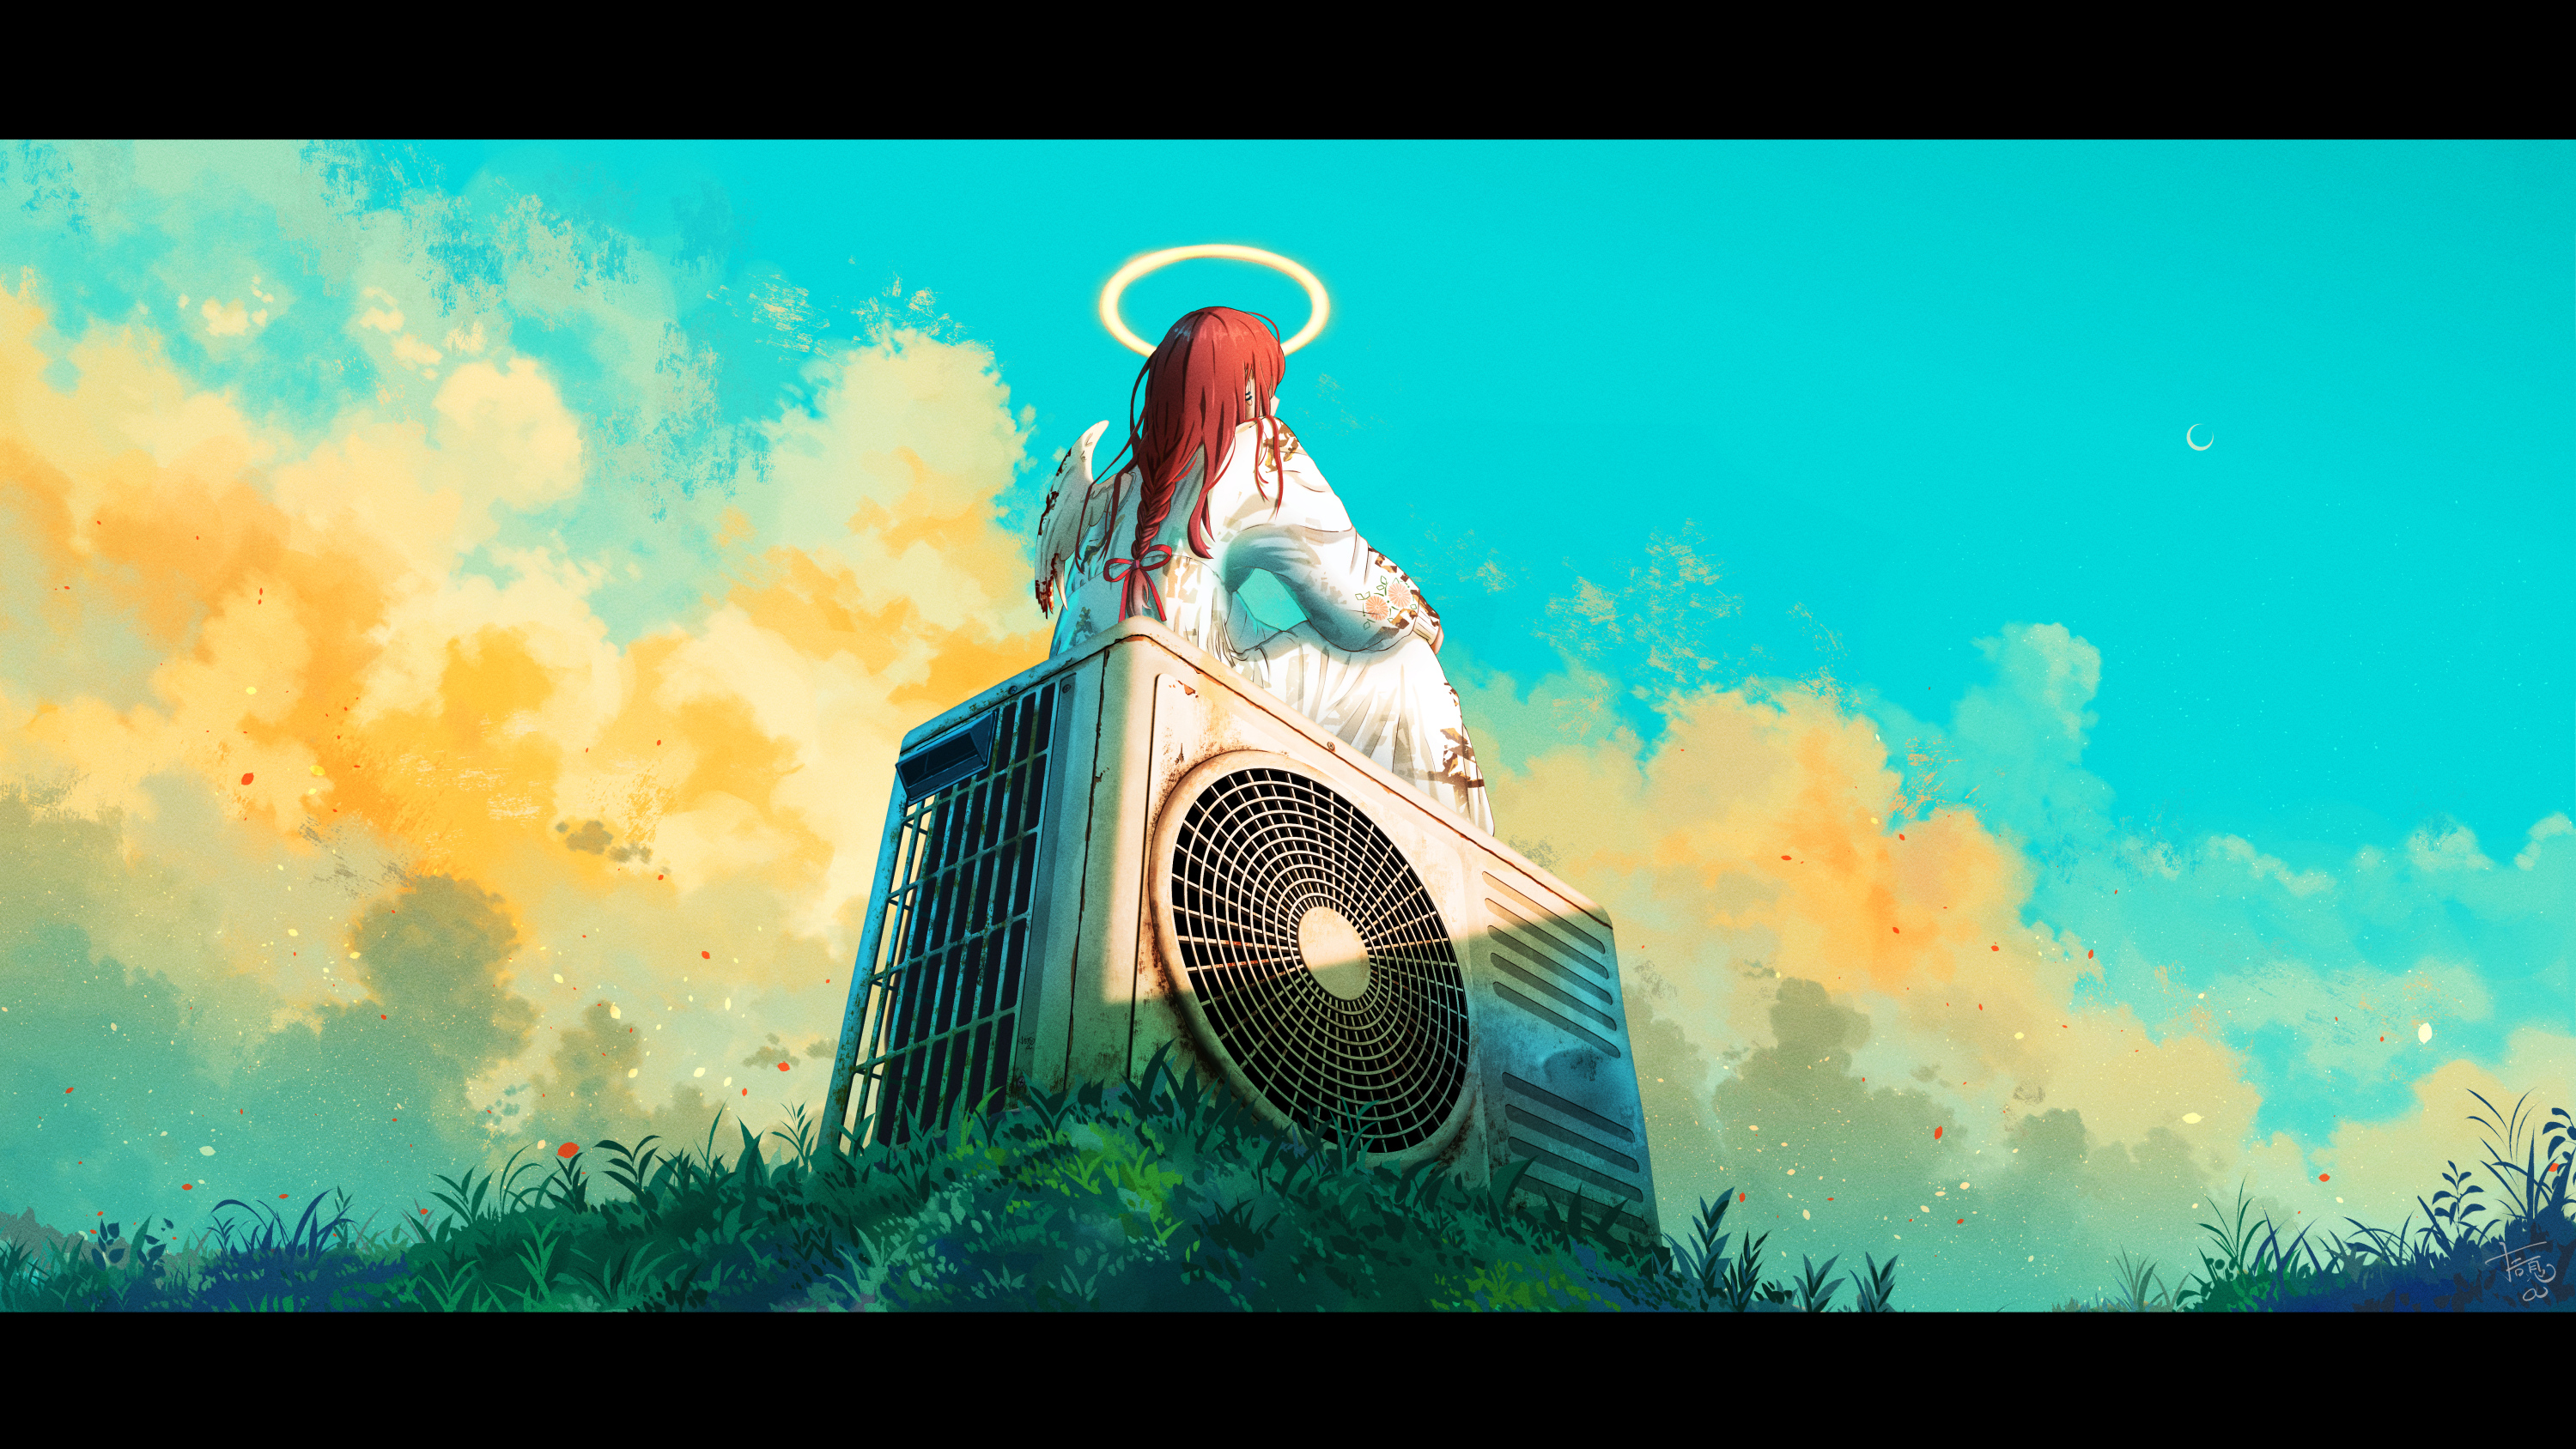 Anime Anime Girls Wings Air Conditioning Clouds Grass Moon Sky Sitting Shuu Illust 3000x1688